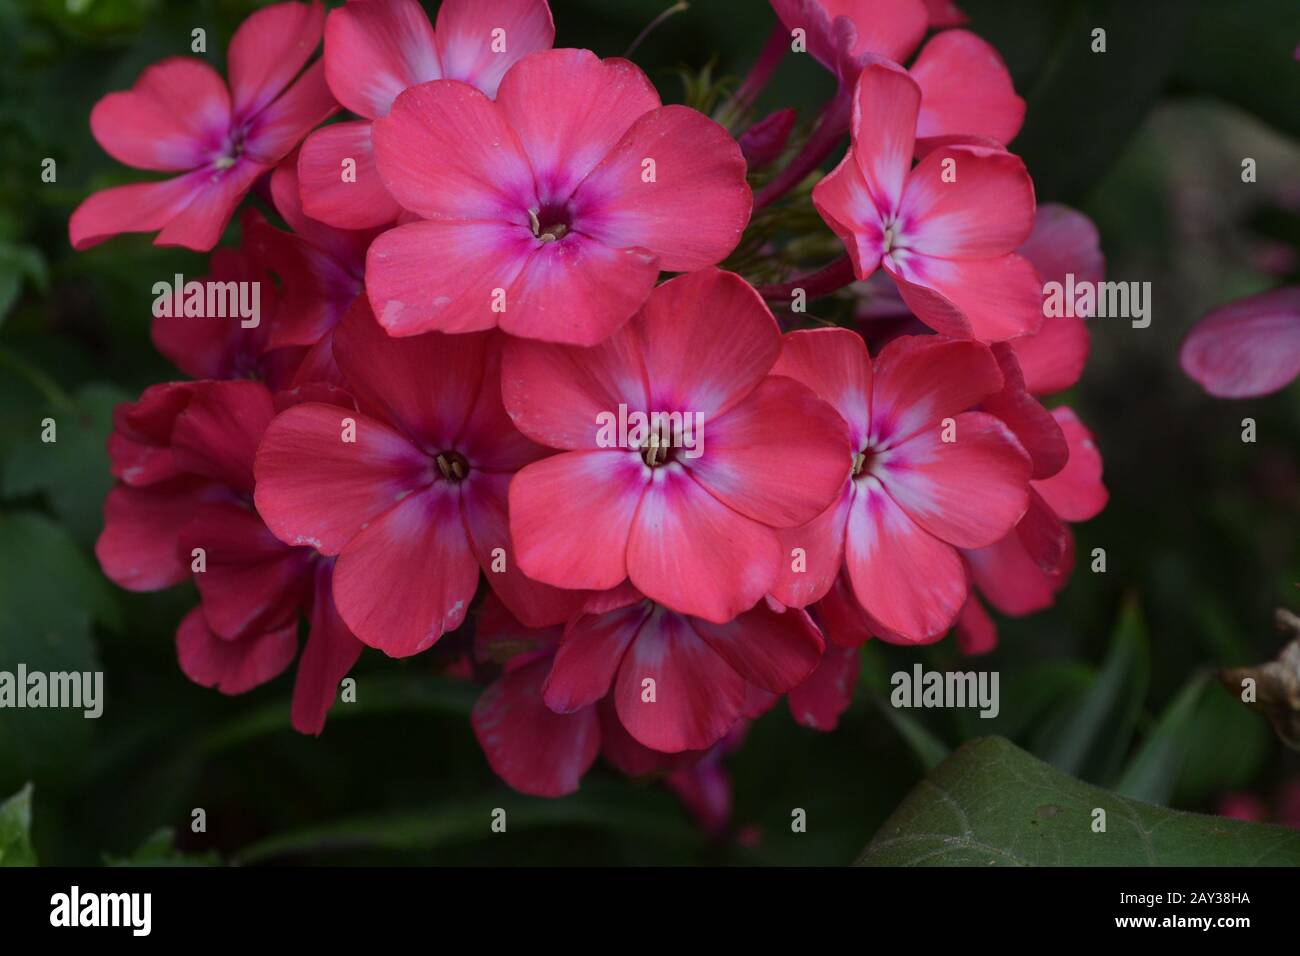 Phlox. Polemoniaceae. Beautiful inflorescence. Flowers pink. Nice smell. Growing flowers. Flowerbed. Garden. Floriculture. On blurred background. Hori Stock Photo